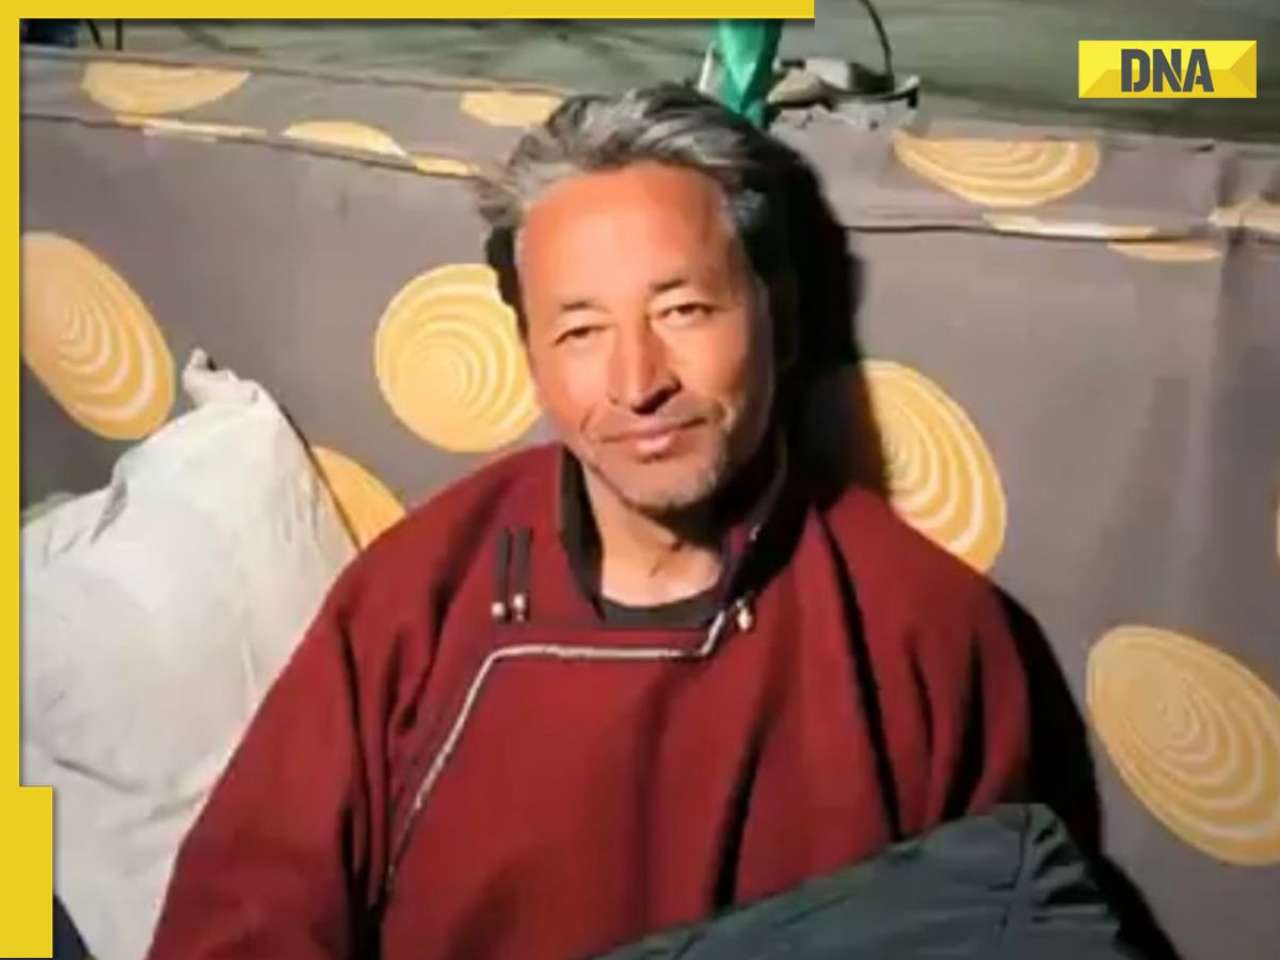 Ladakh: Section 144 imposed in Leh ahead of Sonam Wangchuk’s ‘Pashmina march’